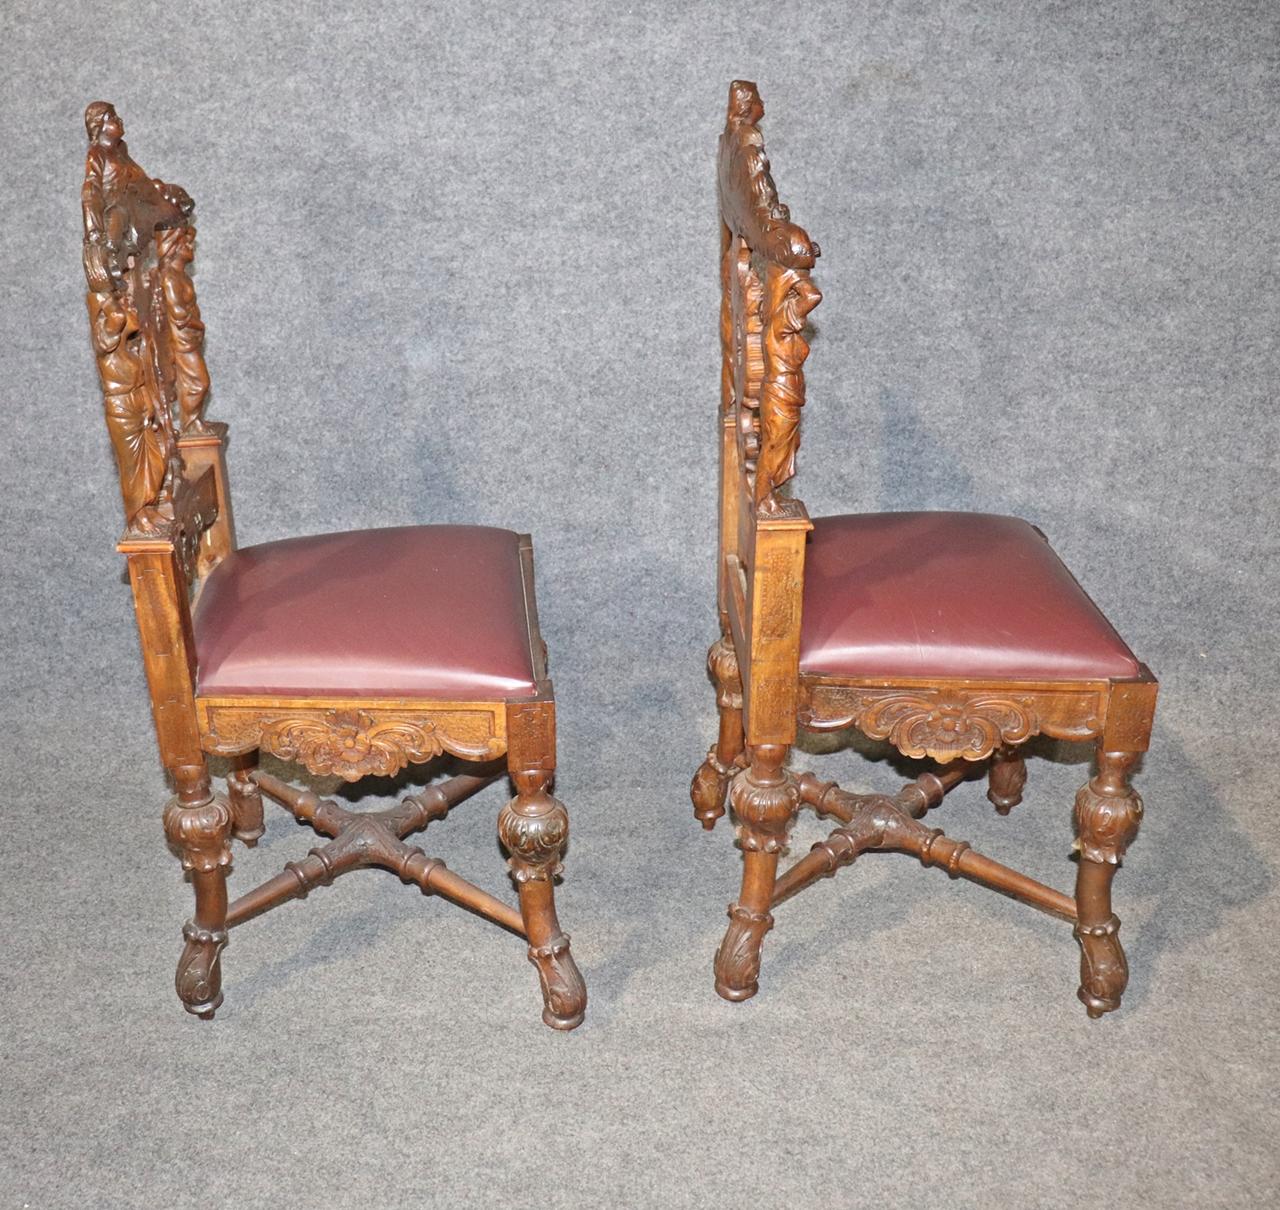 Pair of Figural Carved Walnut R.J. Horner Style Renaissance Chairs, circa 1880 For Sale 13